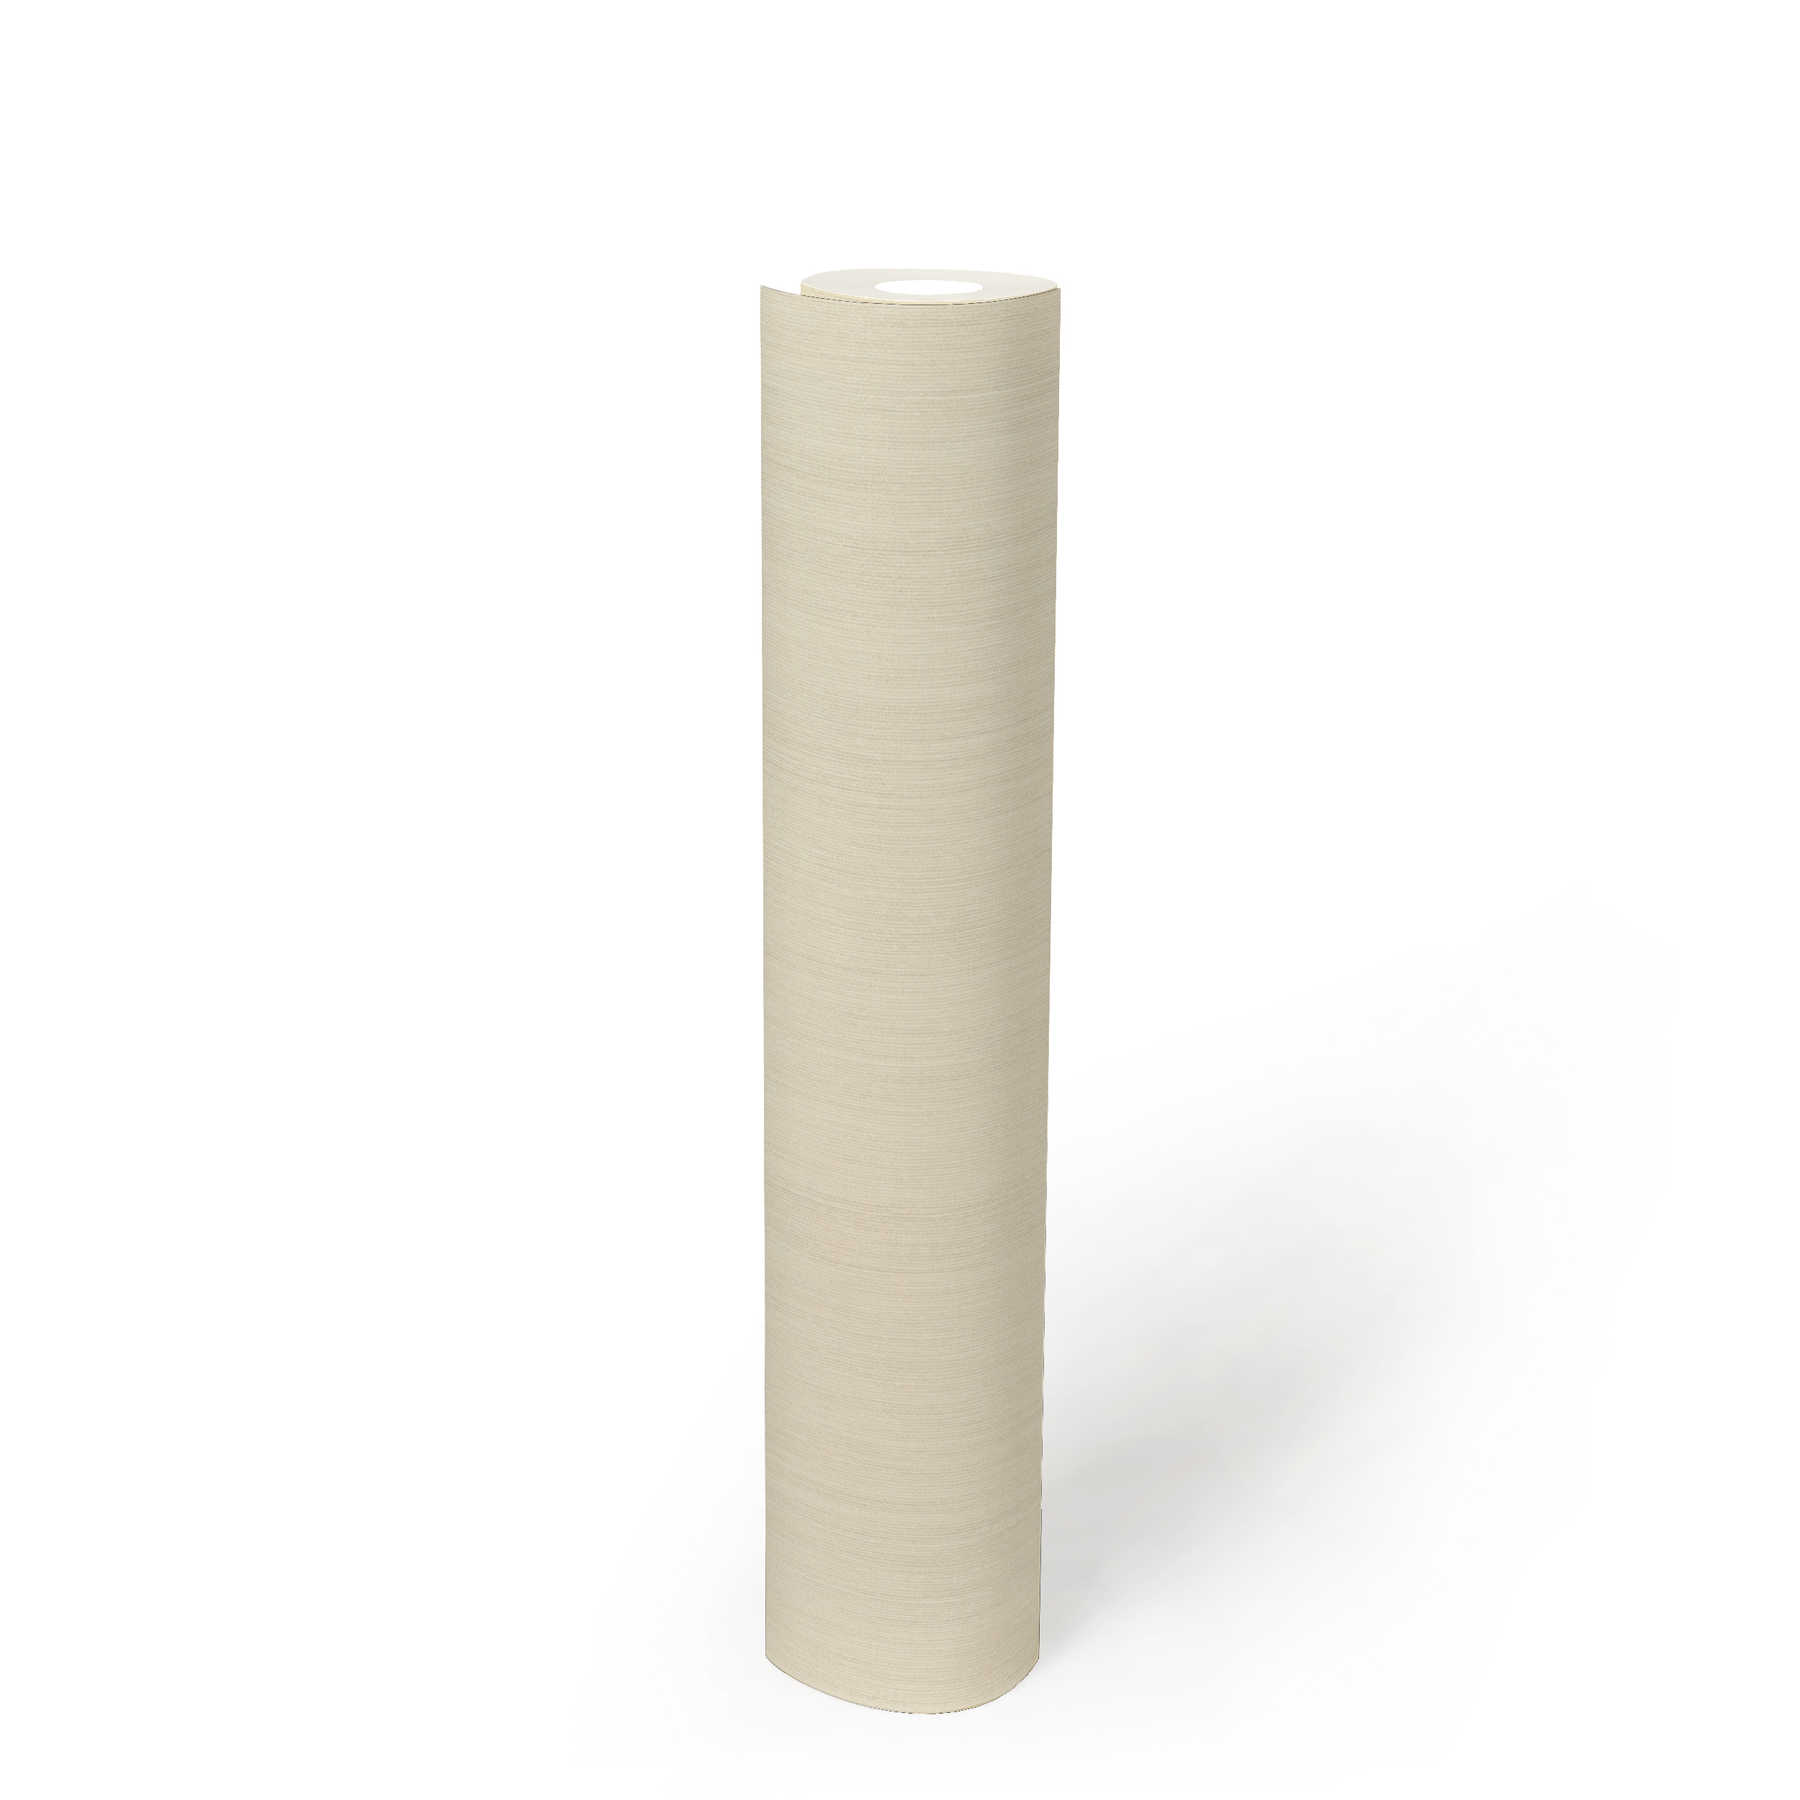             Plain wallpaper cream-beige with embossed pattern & matte surface
        